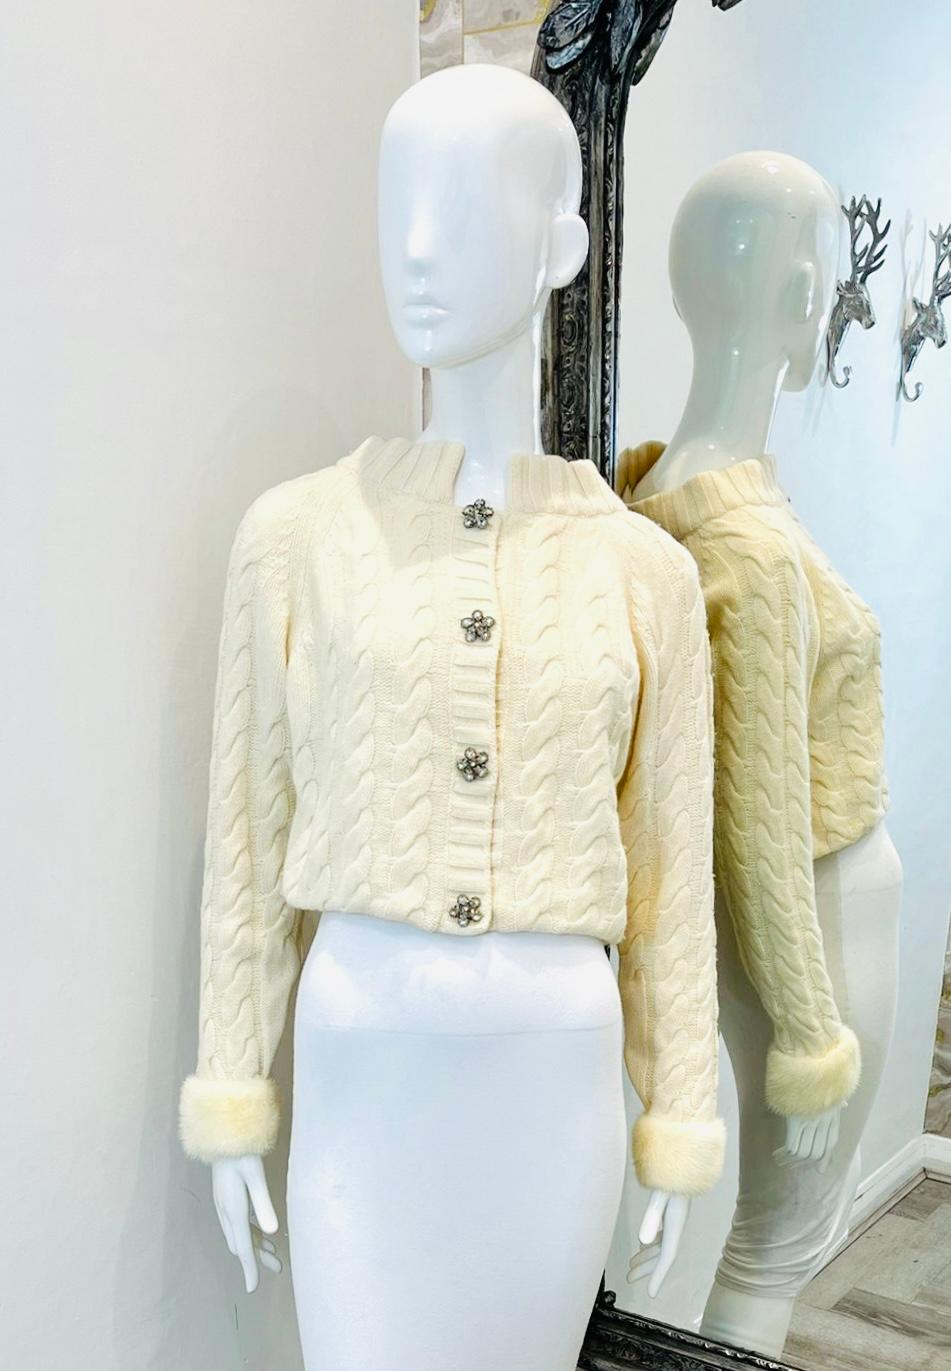 Anna Molinari Angora & Wool Fur Trimmed Cardigan

Ivory knitwear designed with crystal flower shaped button closure.

Detailed with fur trimmed cuffs and cropped fit.

Size – 42IT

Condition – Very Good

Composition – 73% Virgin Wool, 17% Polyamide,